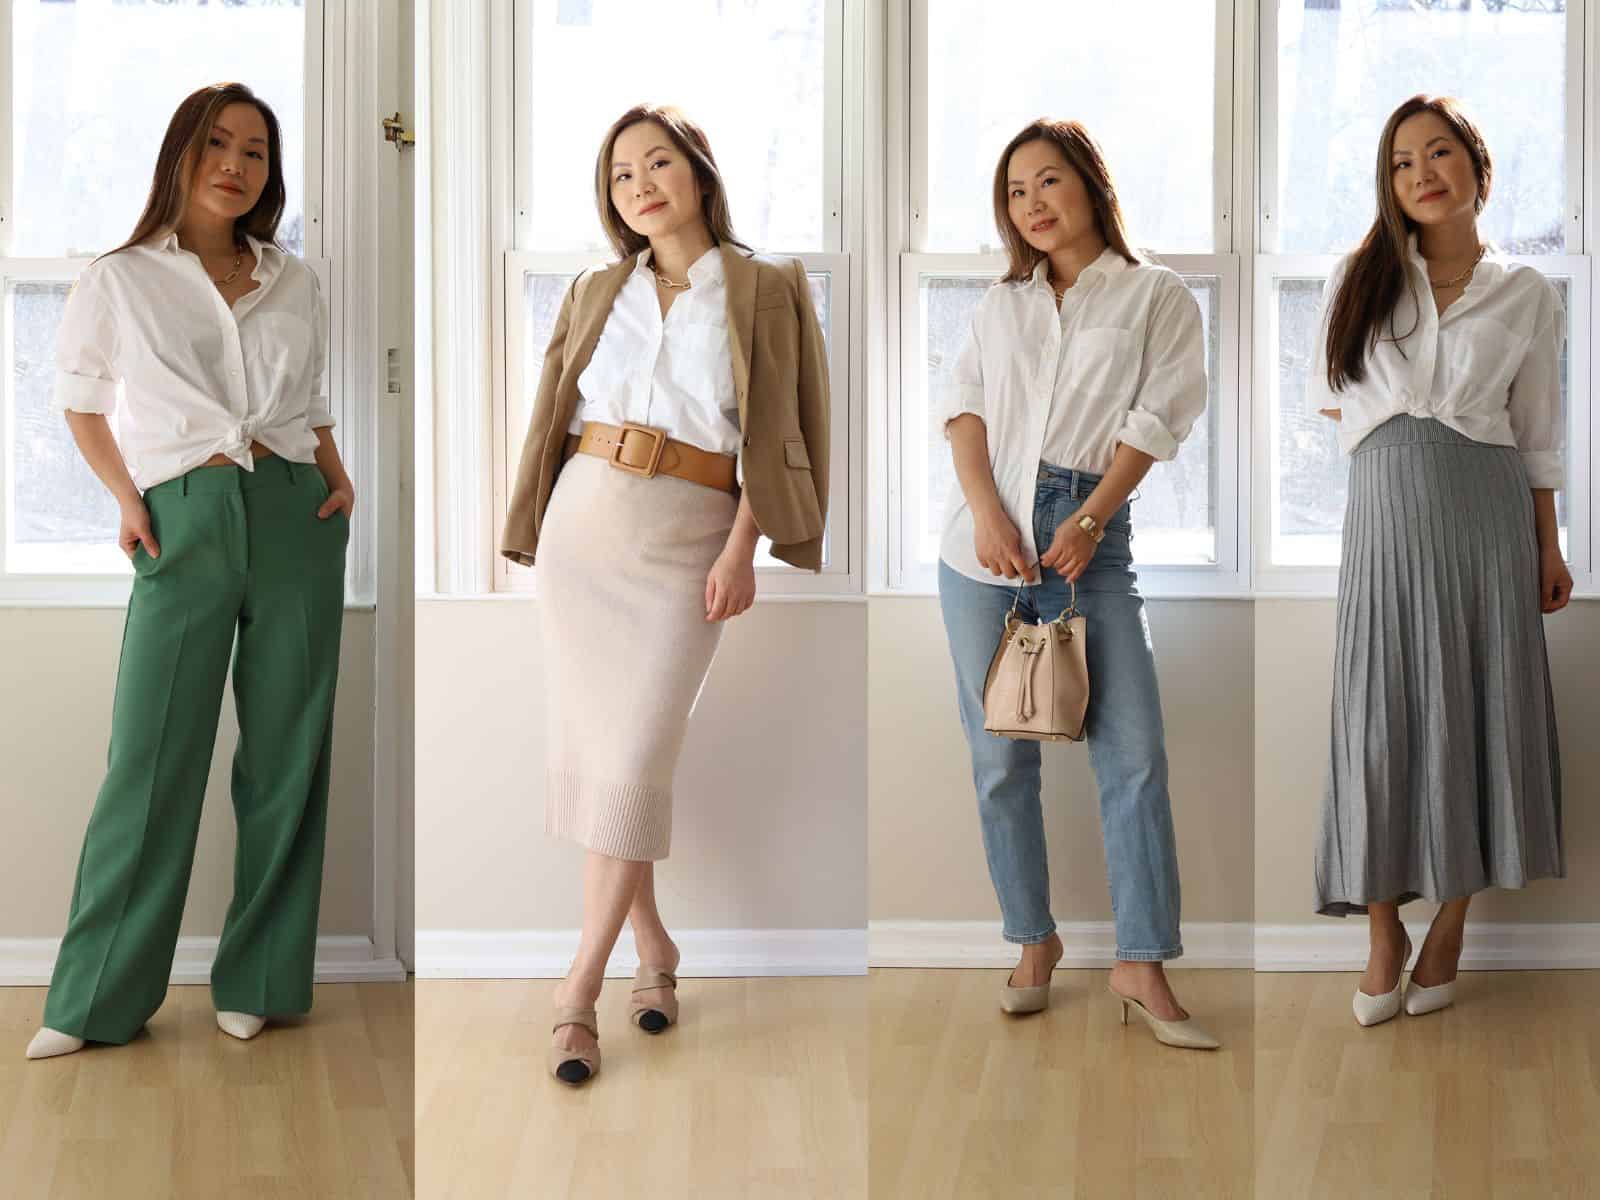 32 Styling Hacks Every Short Woman must Try (the Ultimate Guide